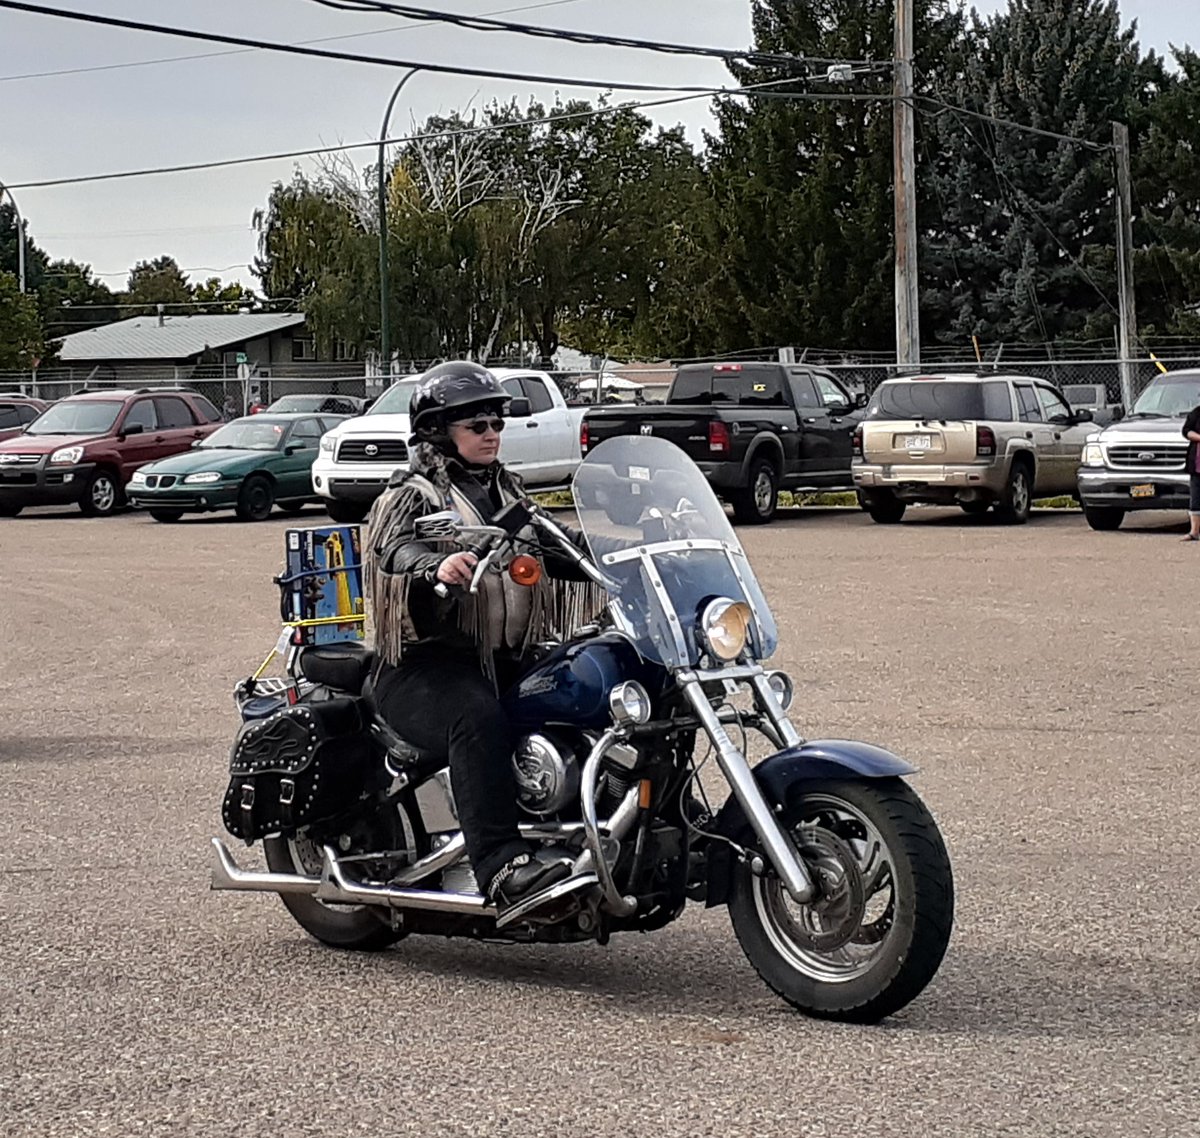 @CarymaRules I'd love to see them lined up parked side by side and then have someone knock them over like dominoes. 😉 Btw, I am a #BikerBitch. Pic from #Toyrun 2019. I have all the freedom I want. I wear a mask because I care about other people. #truckoff #ramranch #rollingthunder